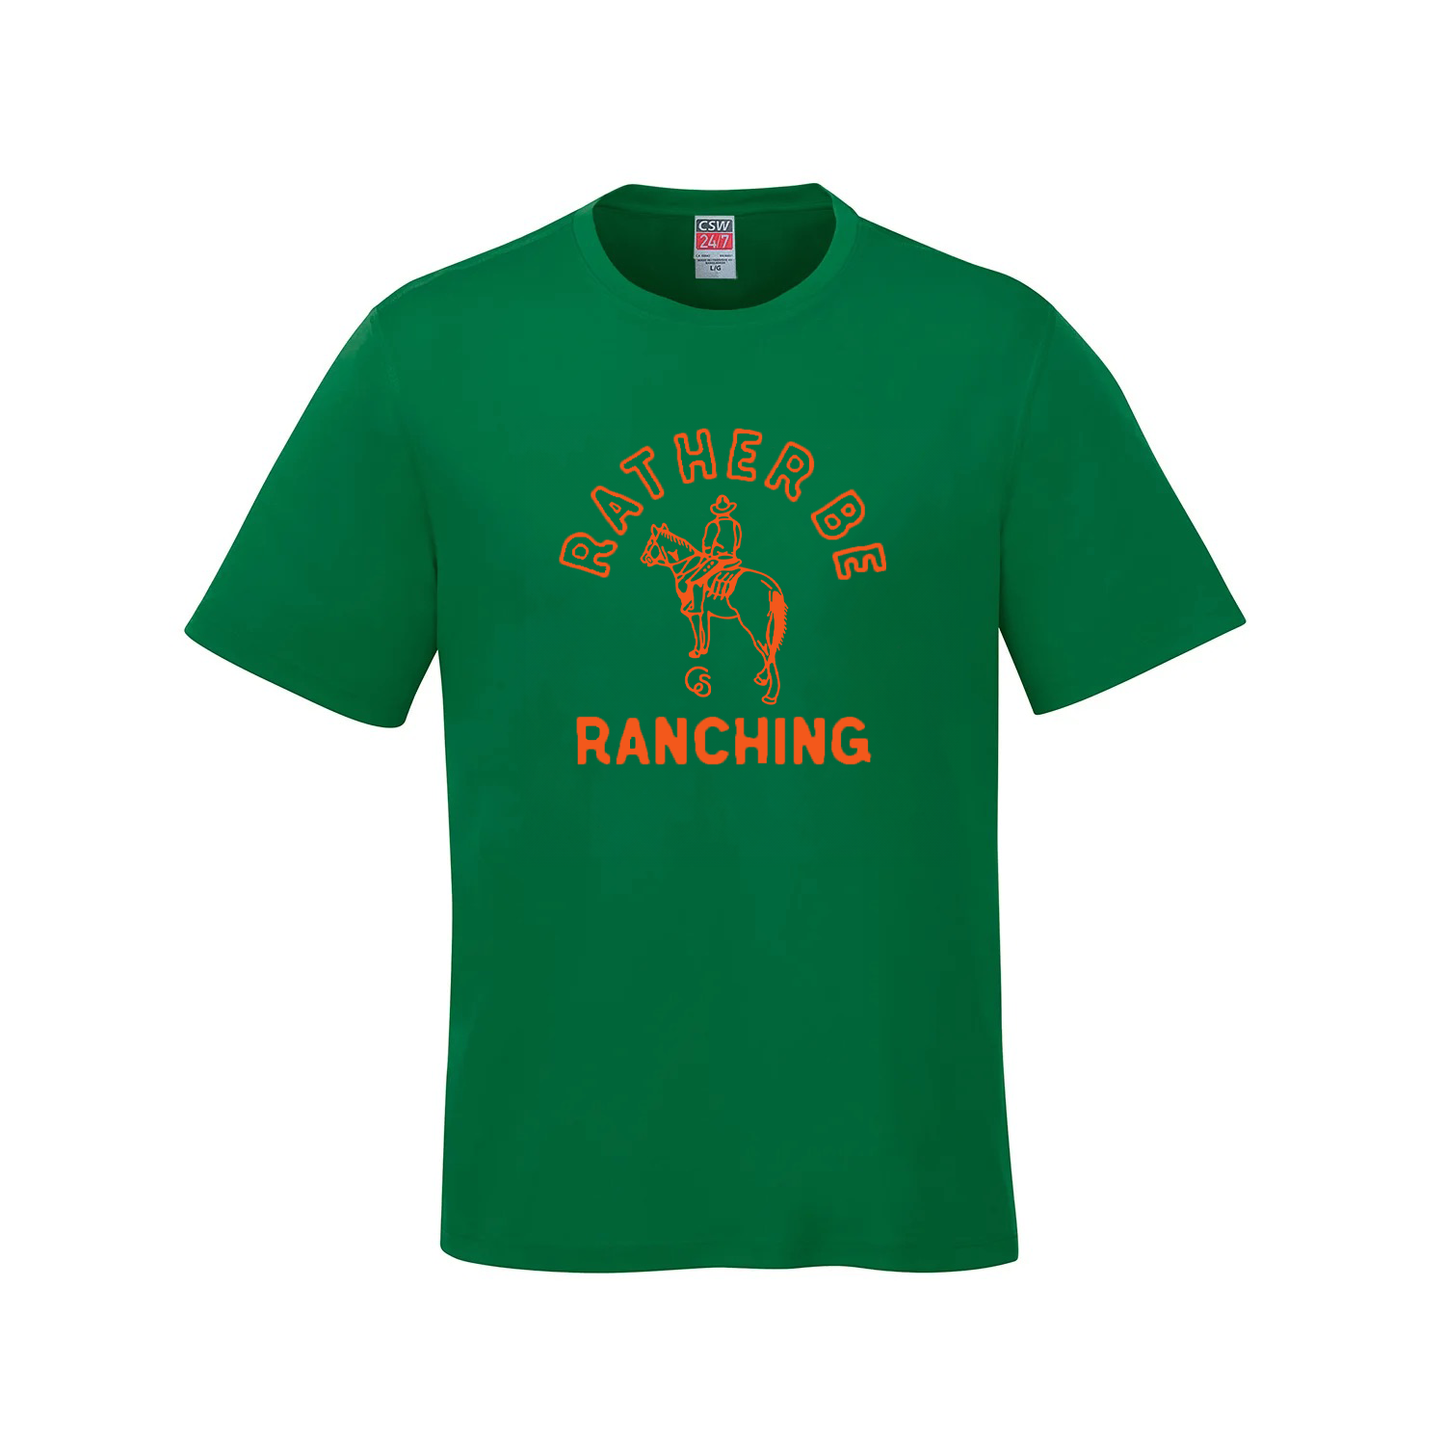 RATHER BE RANCHING - Kelly Green Tee